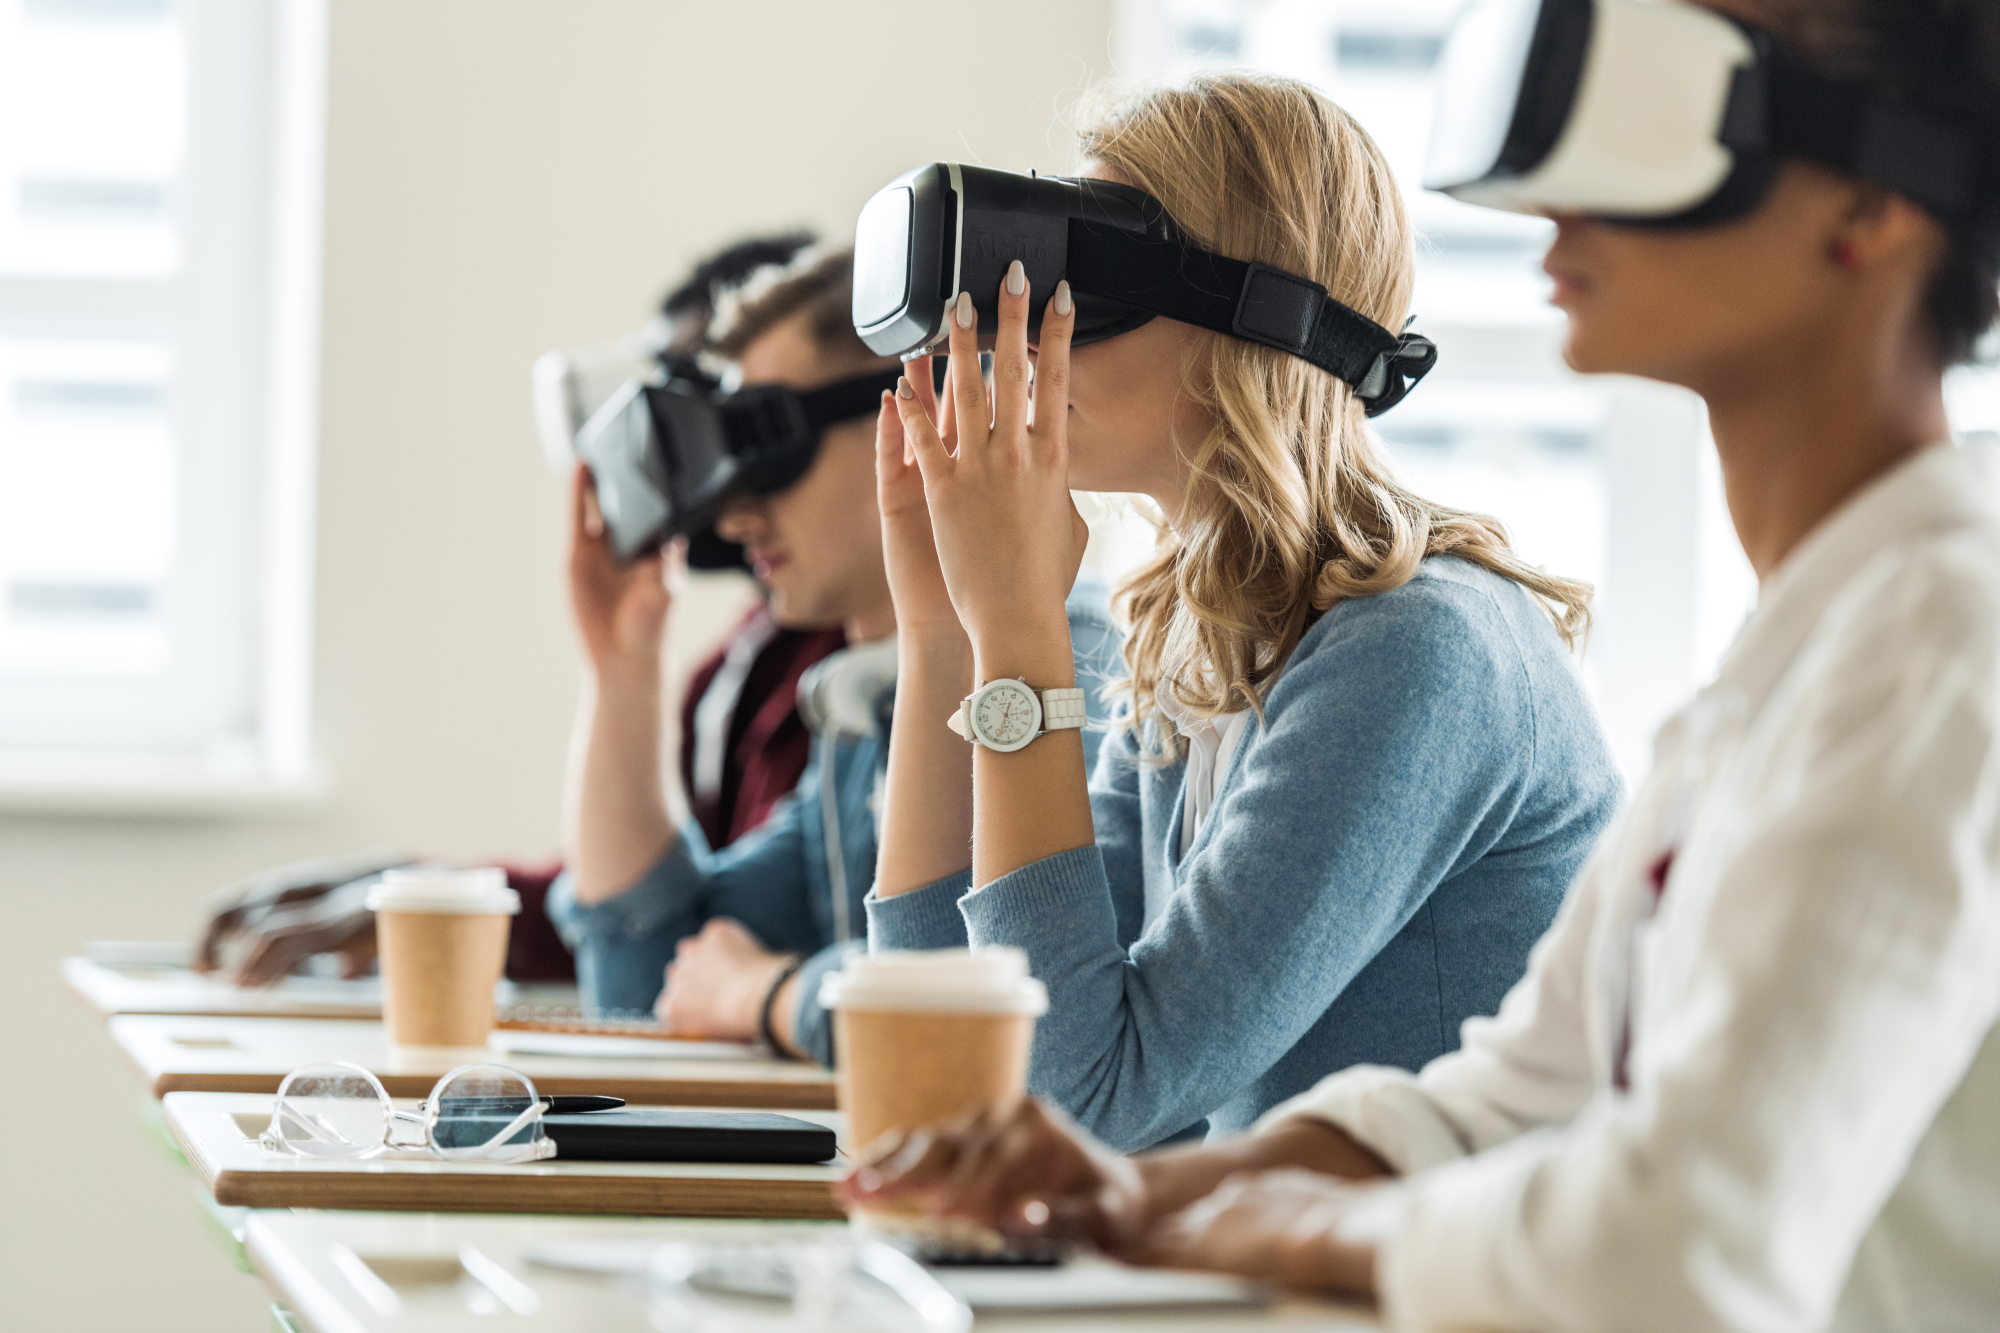 VR-based training for employees